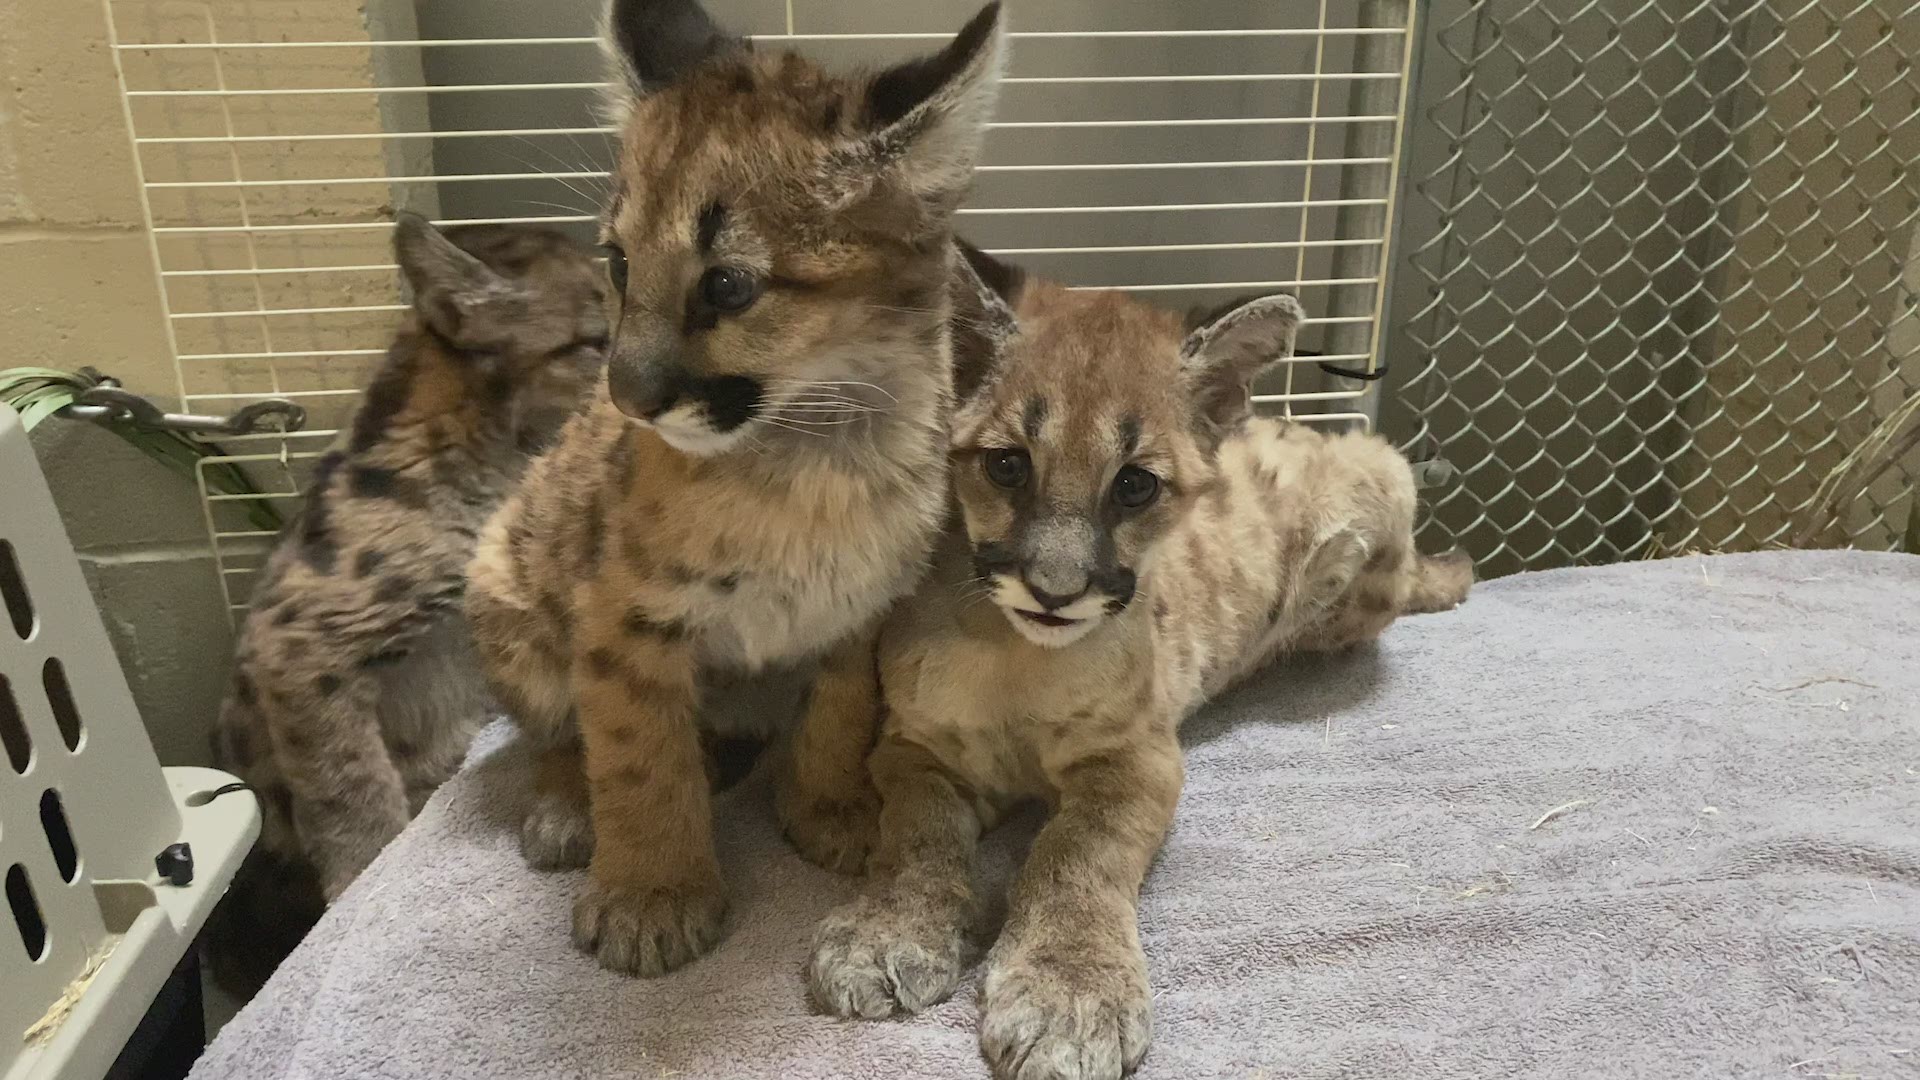 Captain Cal and two sister cubs, unrelated to the male cub, will be arriving in the coming weeks from the Oakland Zoo.